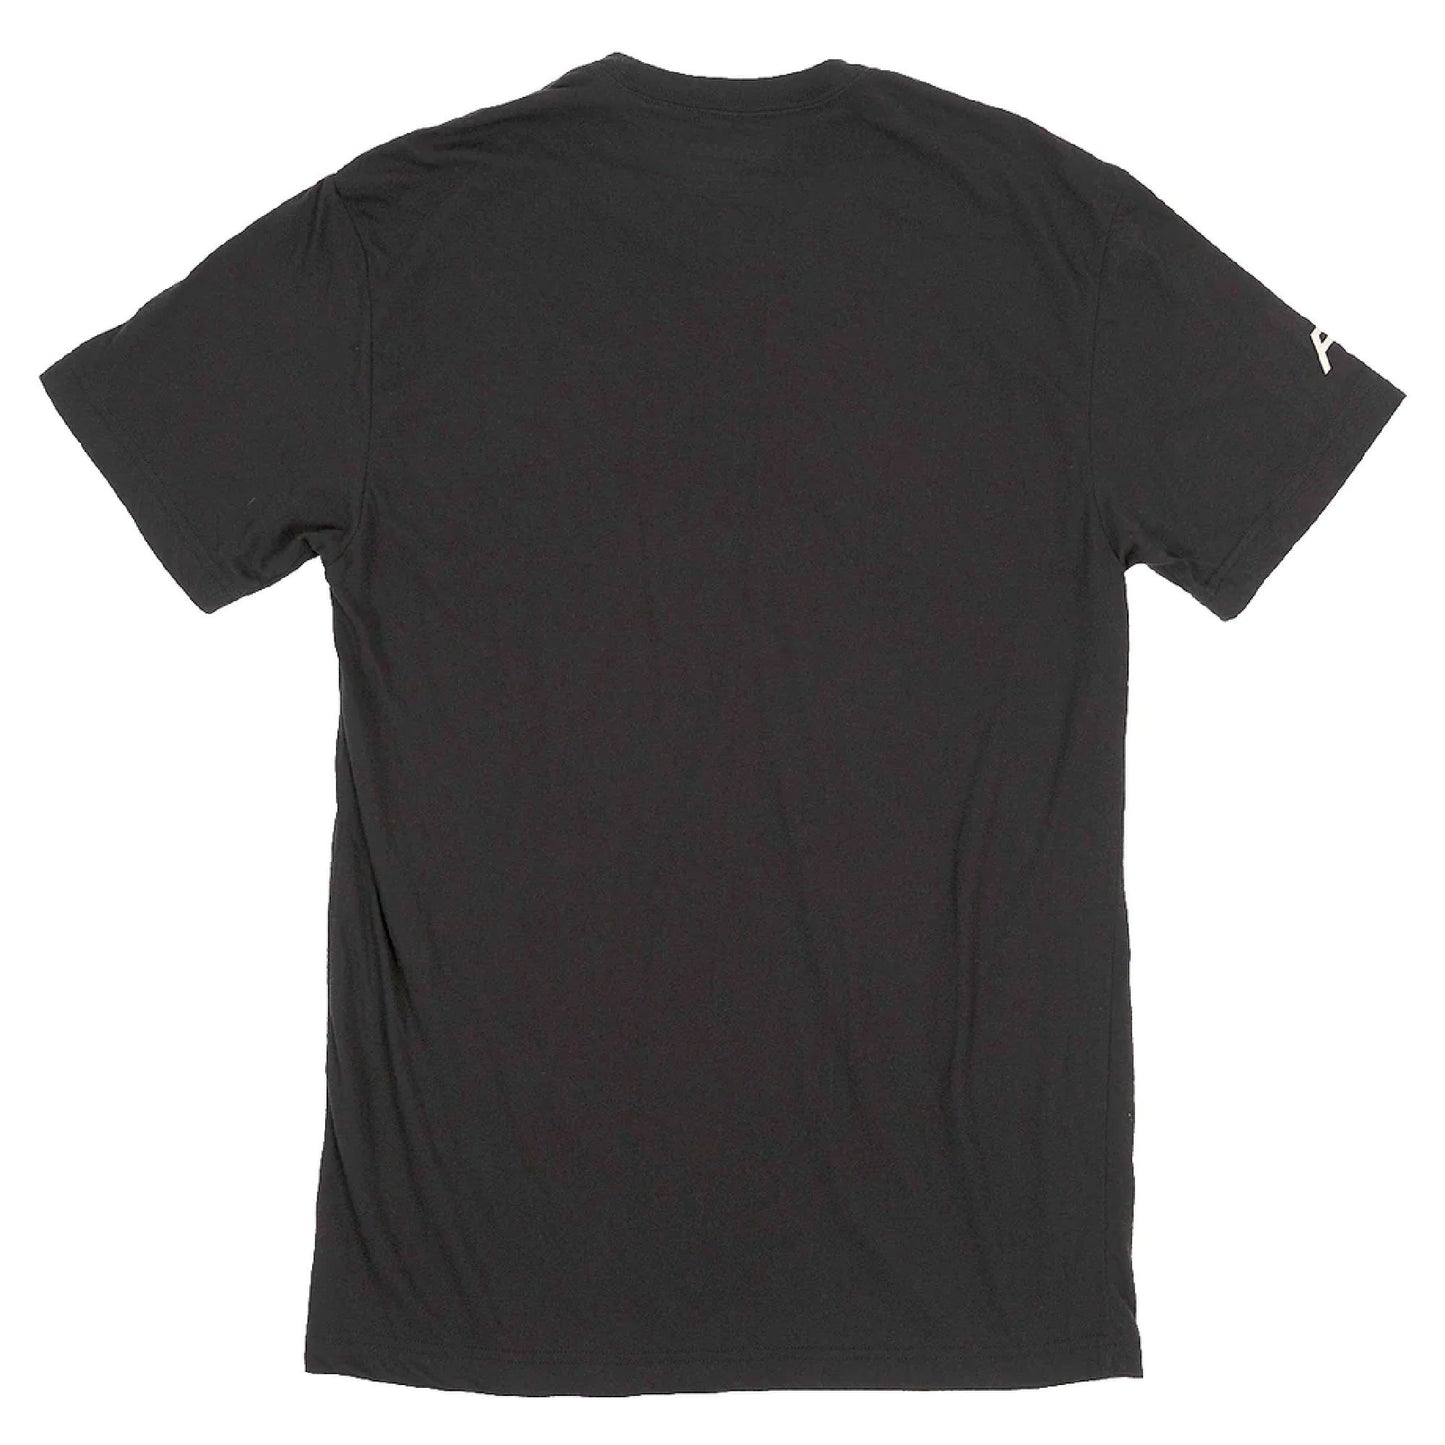 Fasthouse Hierarchy SS Tech Tee Black - Fasthouse SS Shirts